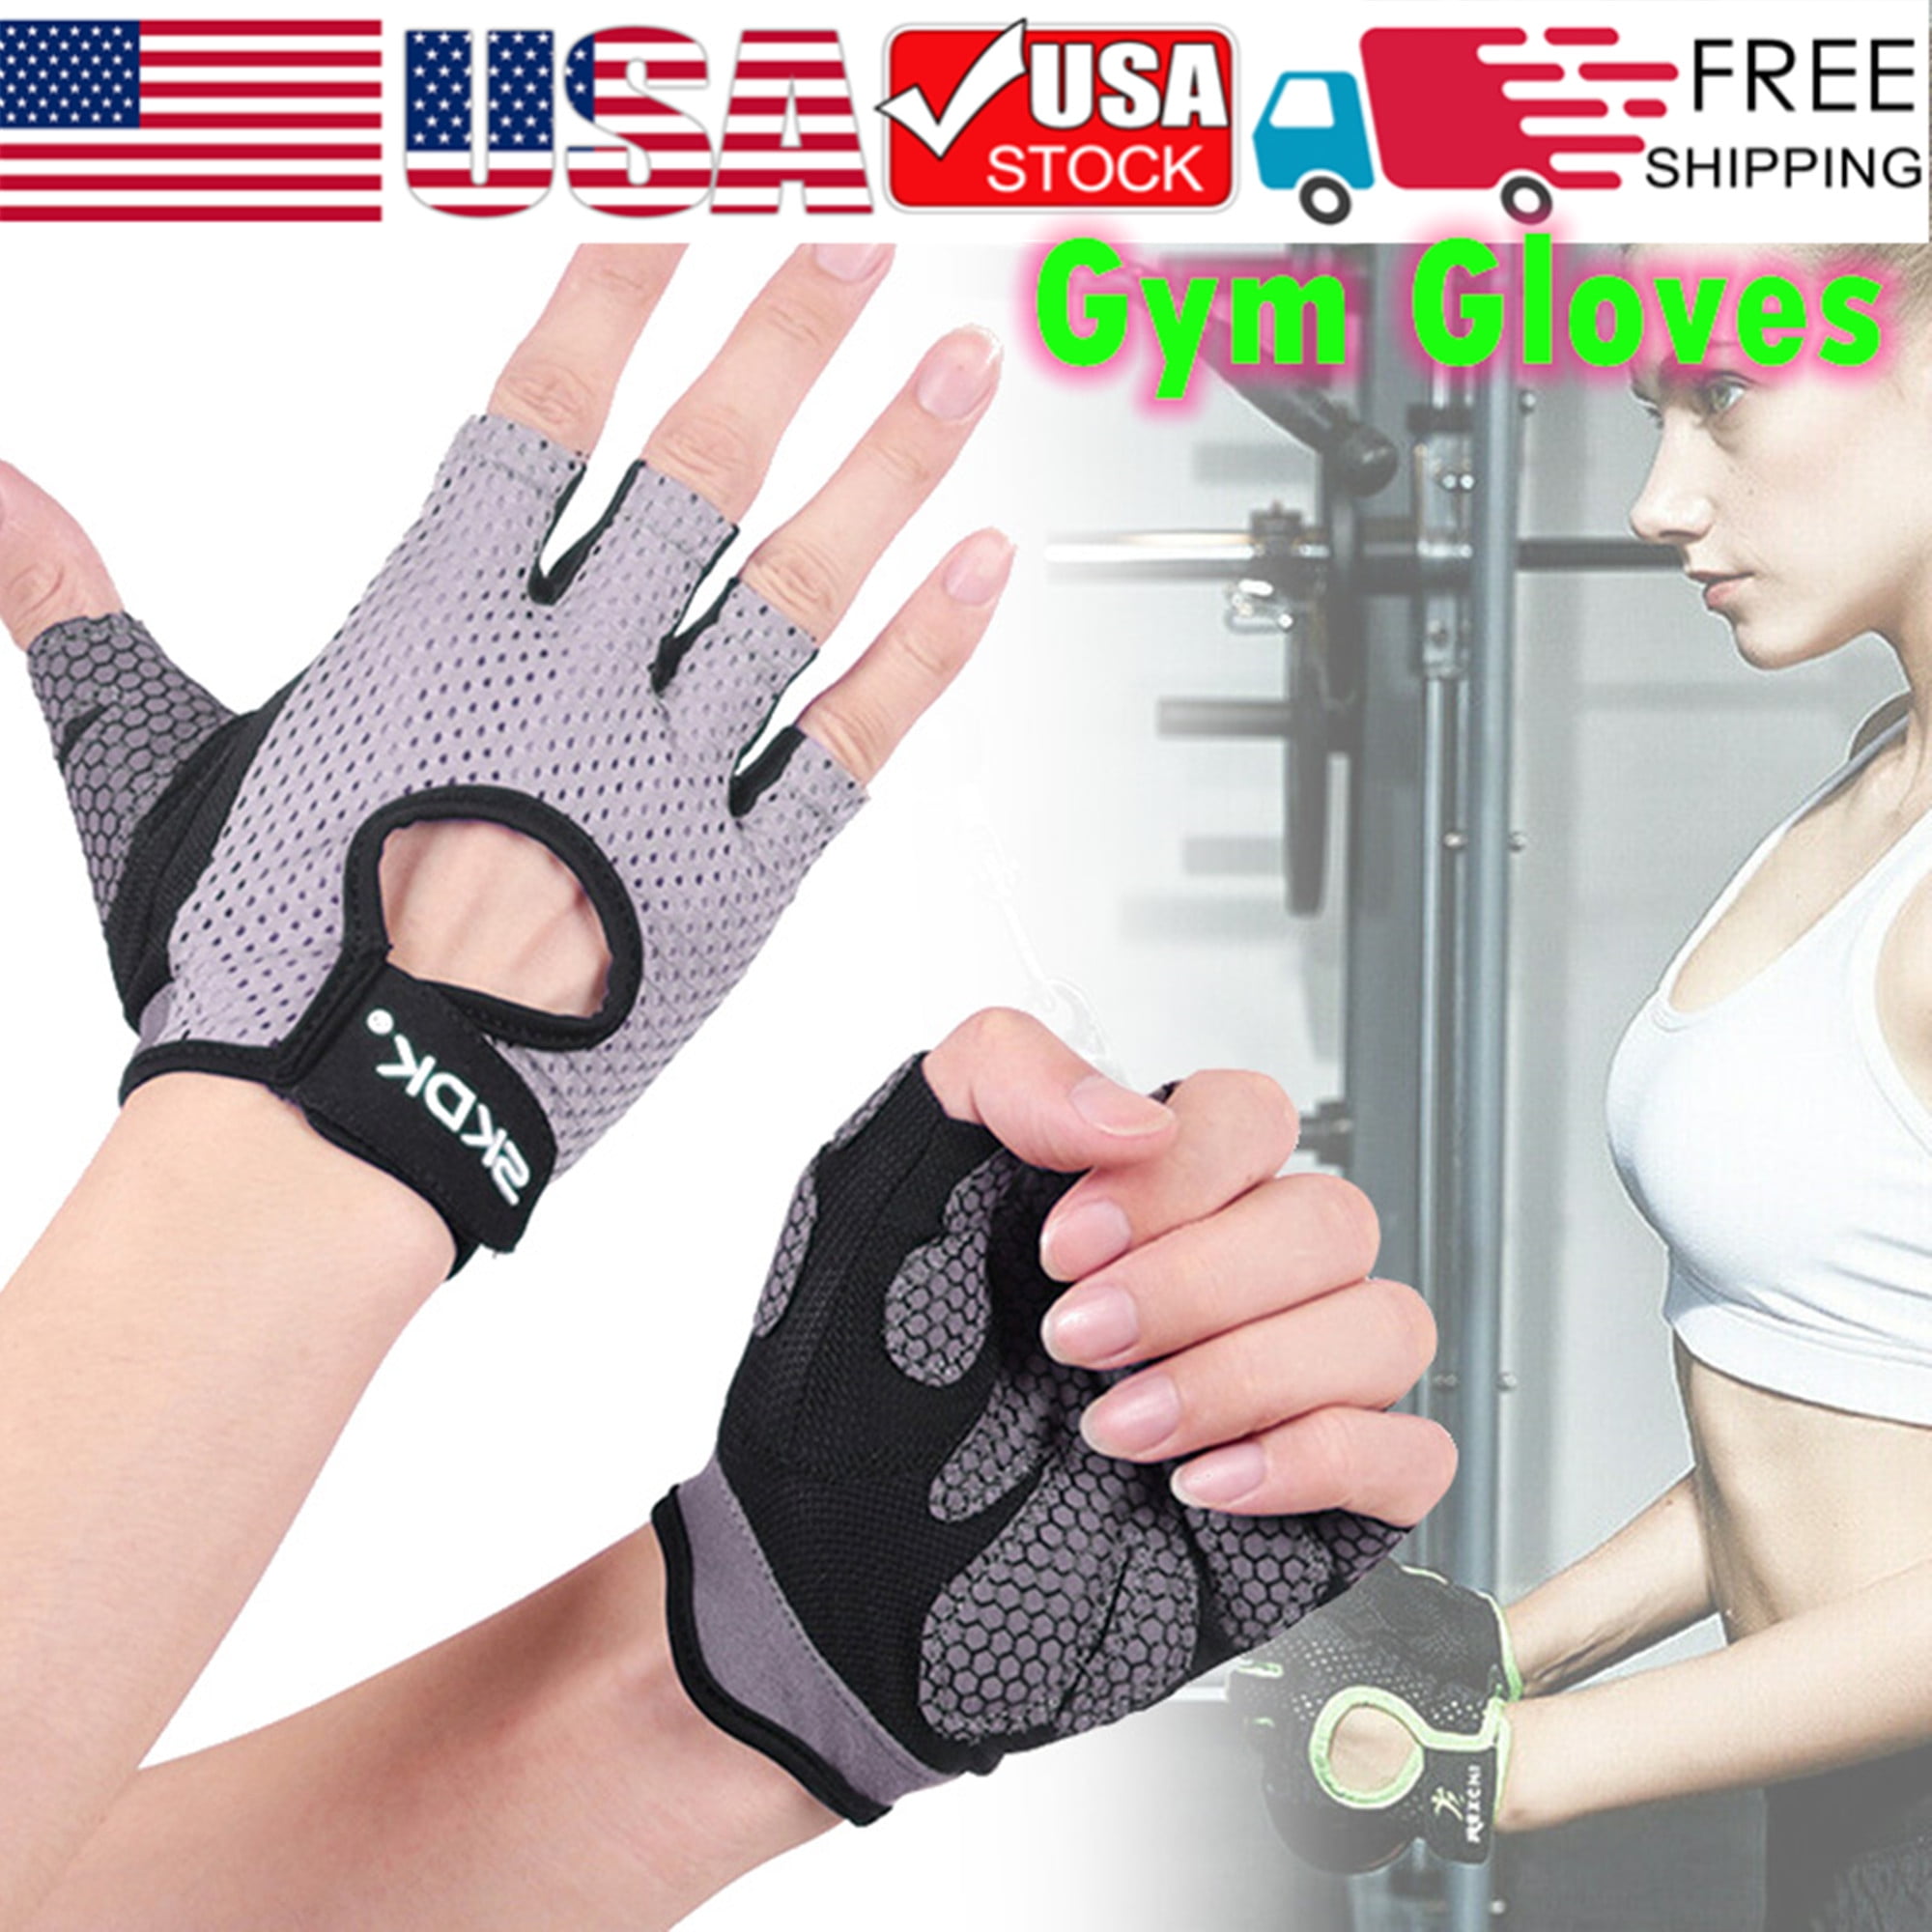 Details about   MEN WOMEN WEIGHT LIFTING GLOVES GYM WORKOUT EXERCISE TRAINING HALF FINGURE 